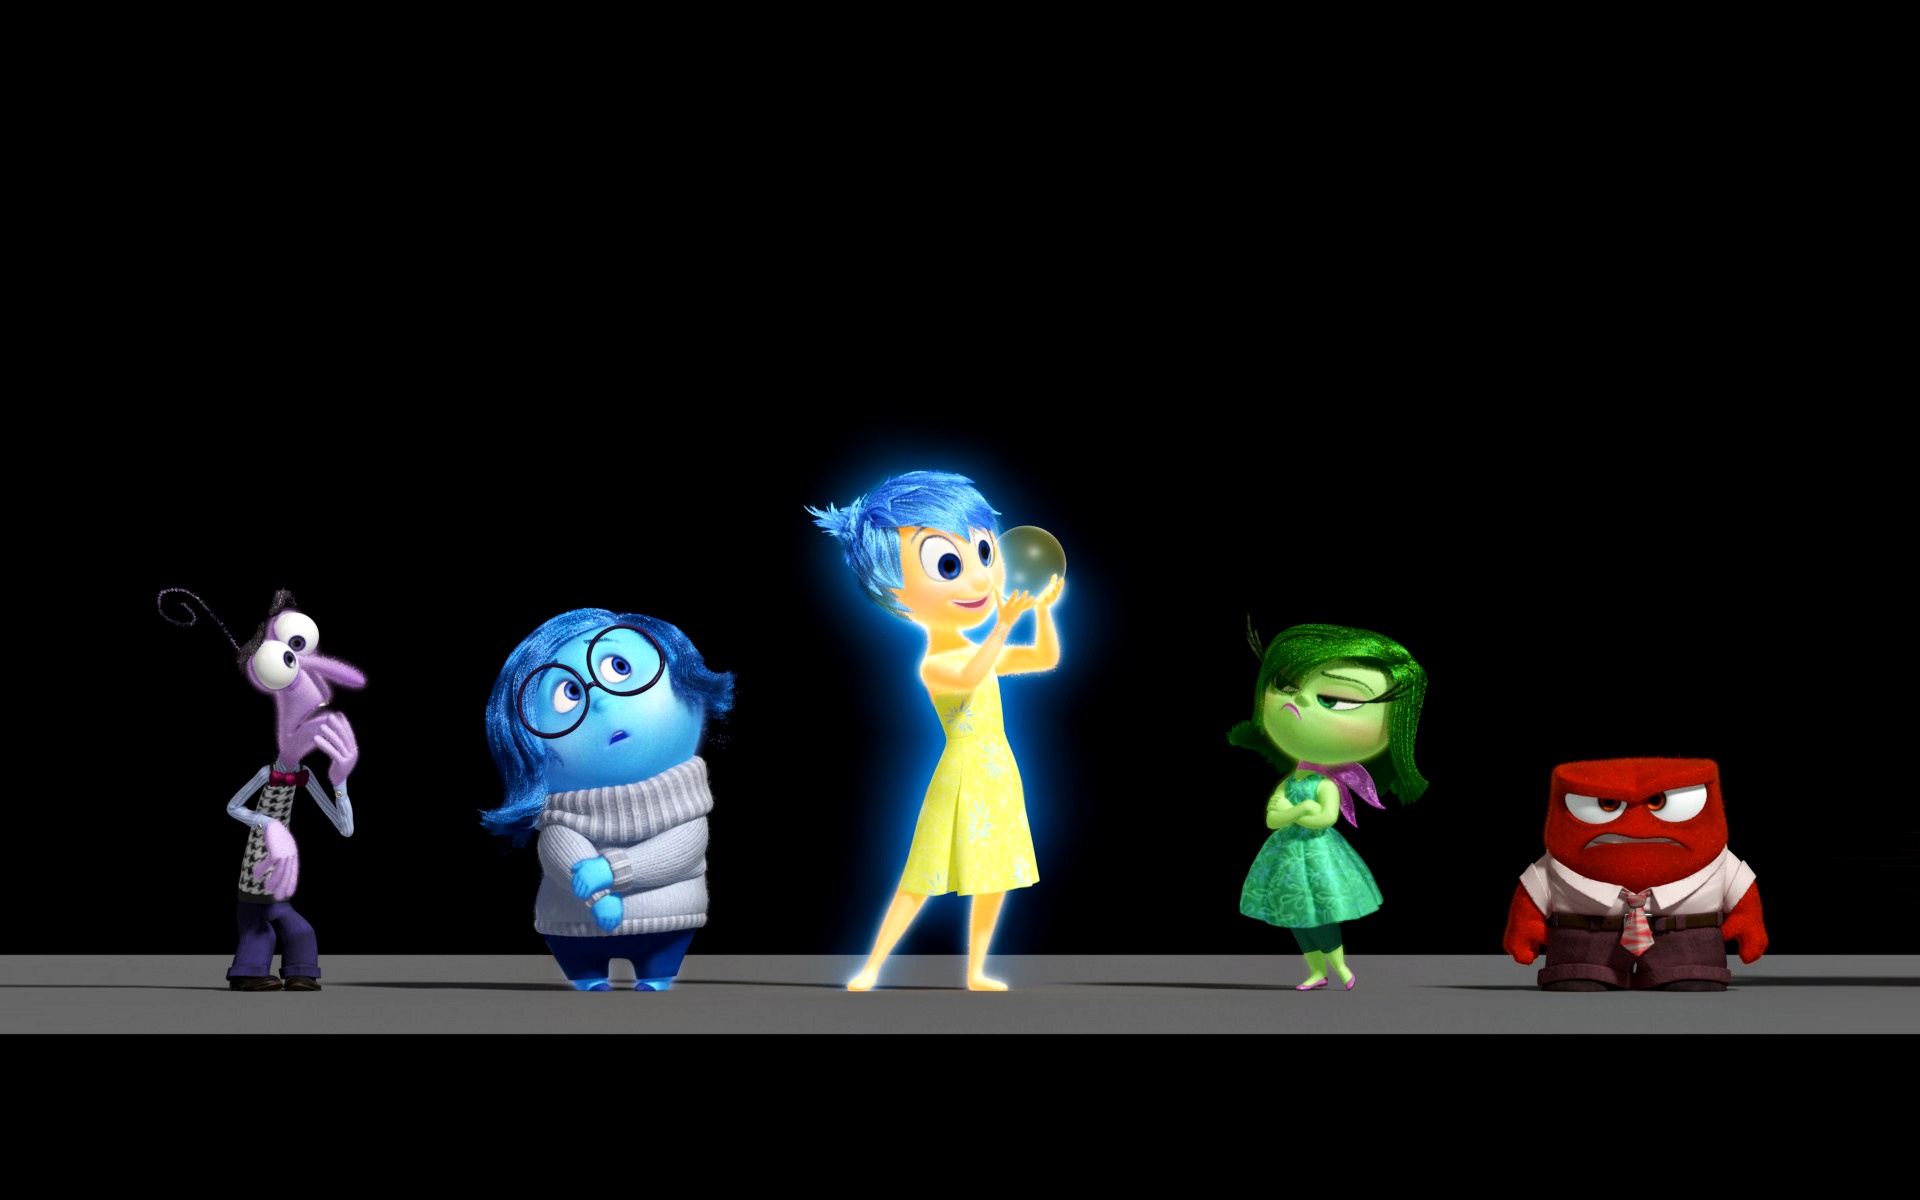  Pixar Inside Out HD Wallpaper Widescreen and Full HD Wallpapers 1920x1200